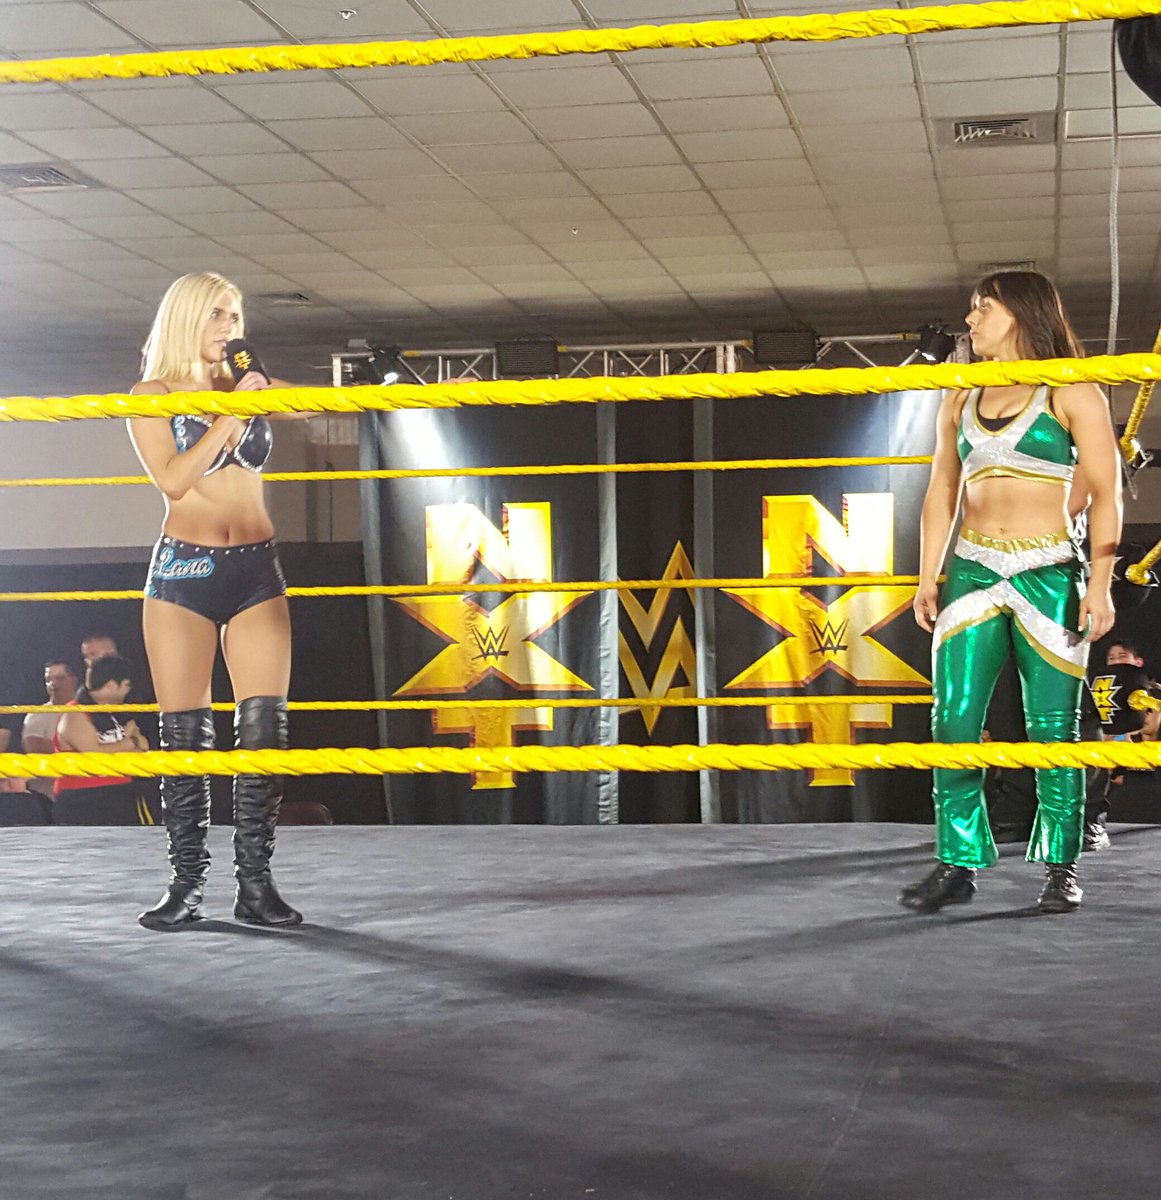 RT @PaulPaul_17: @LanaWWE @WWENXT @NikkiCrossWWE How cool!

P.S. I got to see the tag match in NXT in person! https://t.co/Xww1SjyxbT